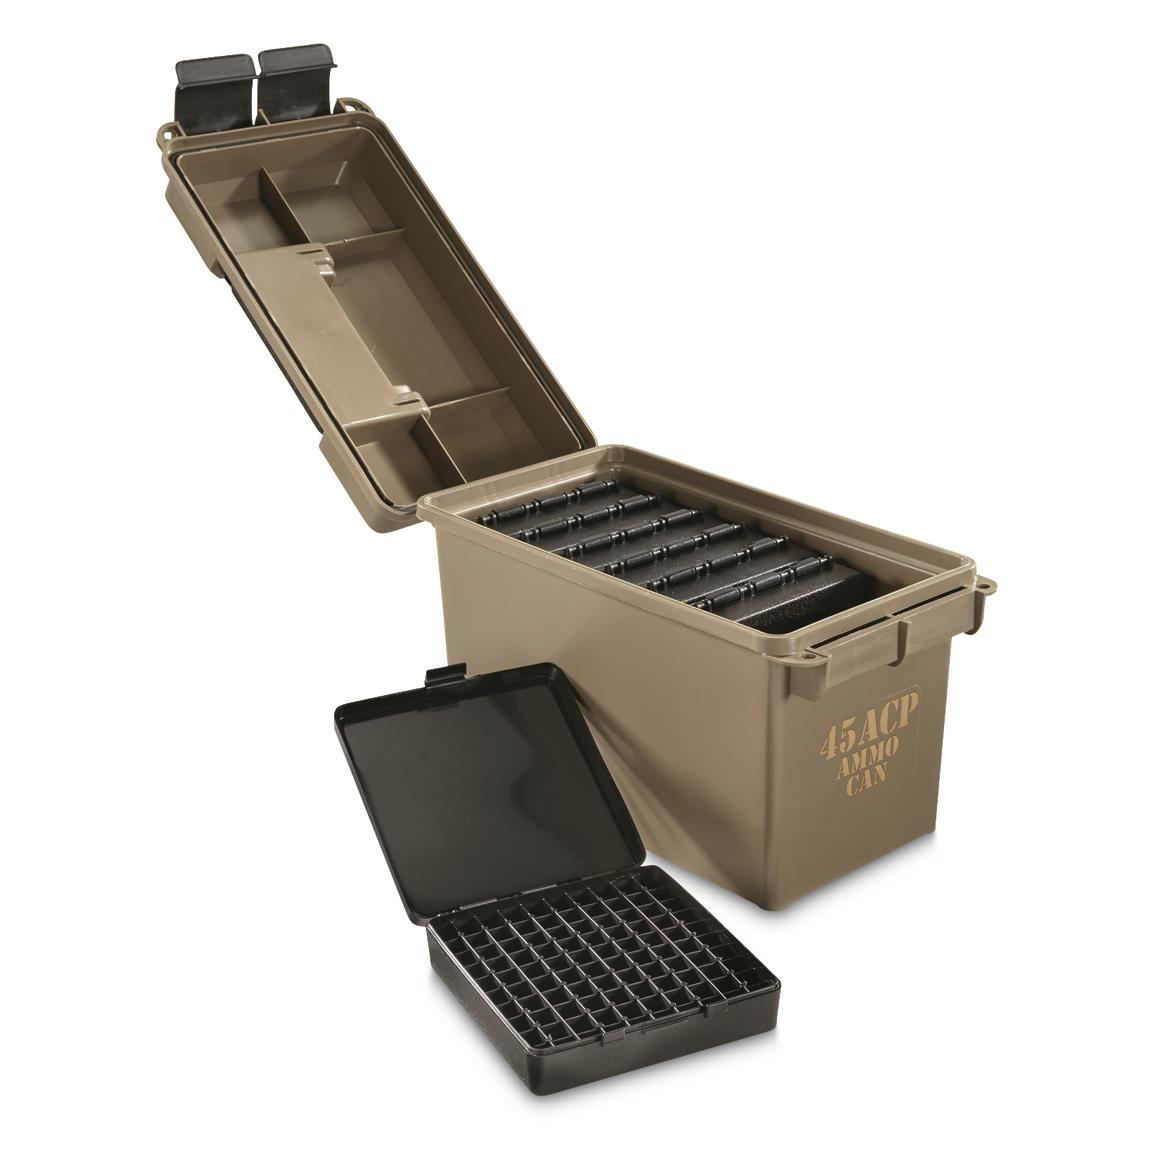 Nodig hebben Onzeker Rusland Ammo Can, .45 ACP Caliber, with 7 Ammo Boxes Holds 700 Rounds - 609503,  Ammo Boxes & Cans at Sportsman's Guide